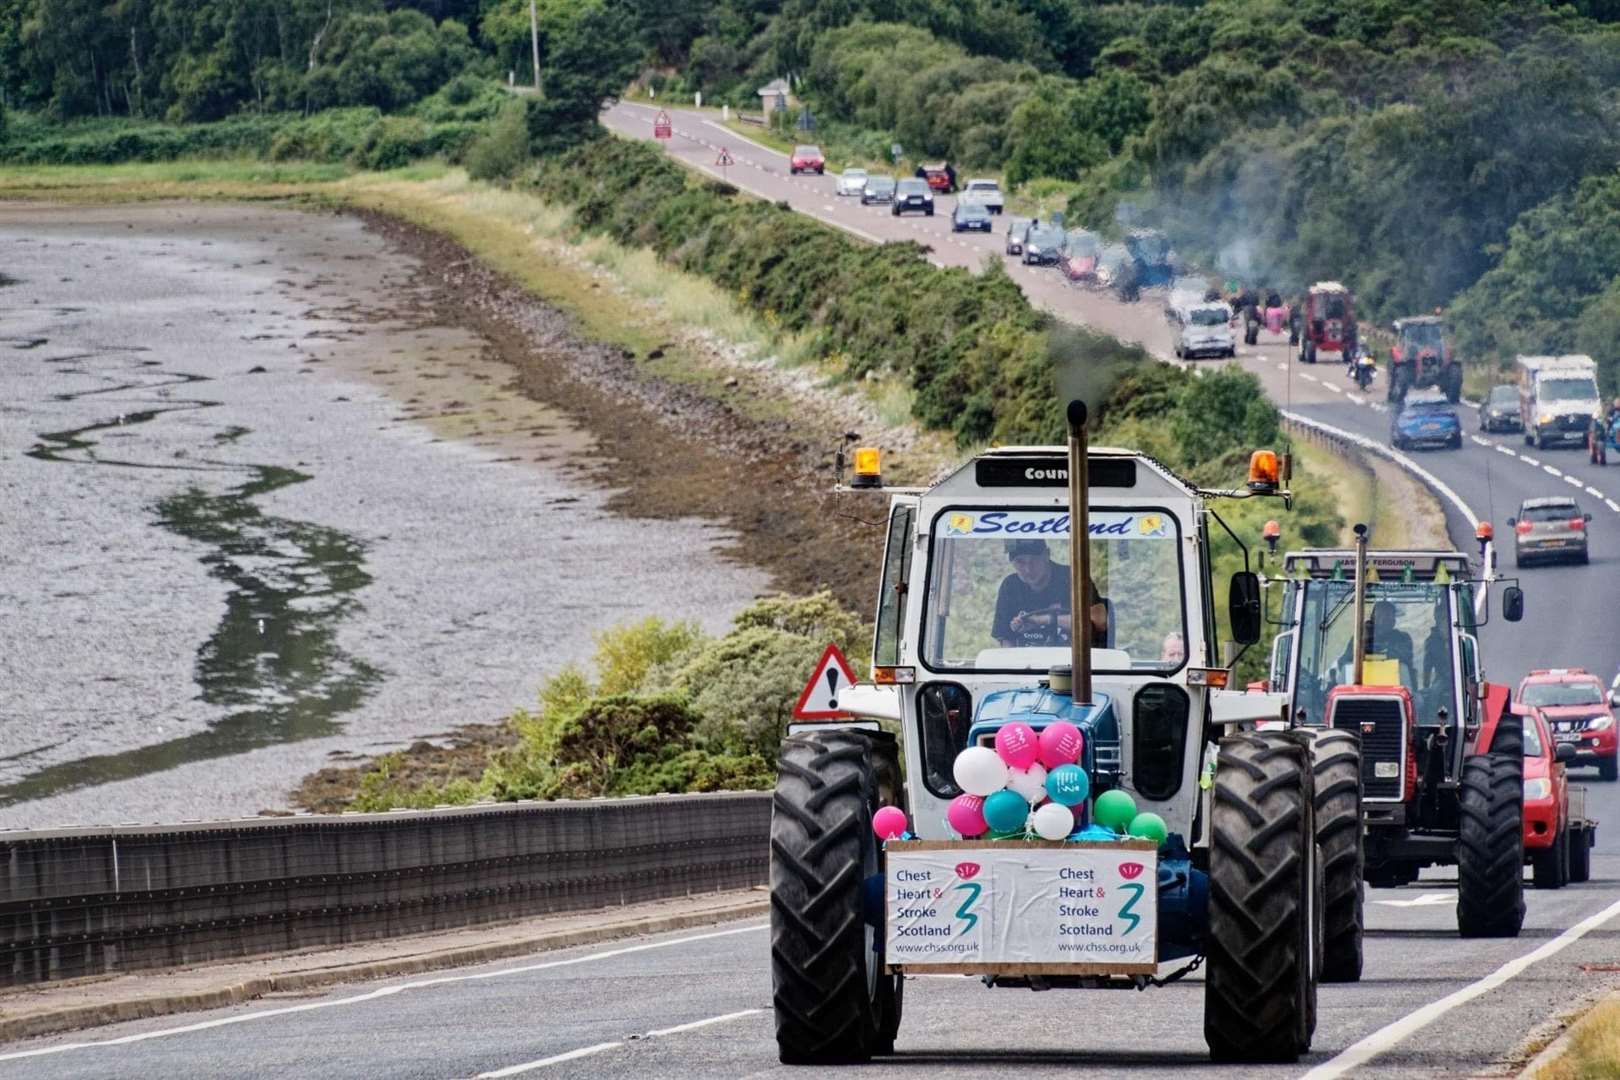 The tractor run has raised thousands for Chest, Heart and Stroke Scotland and Macmillan Nurses.